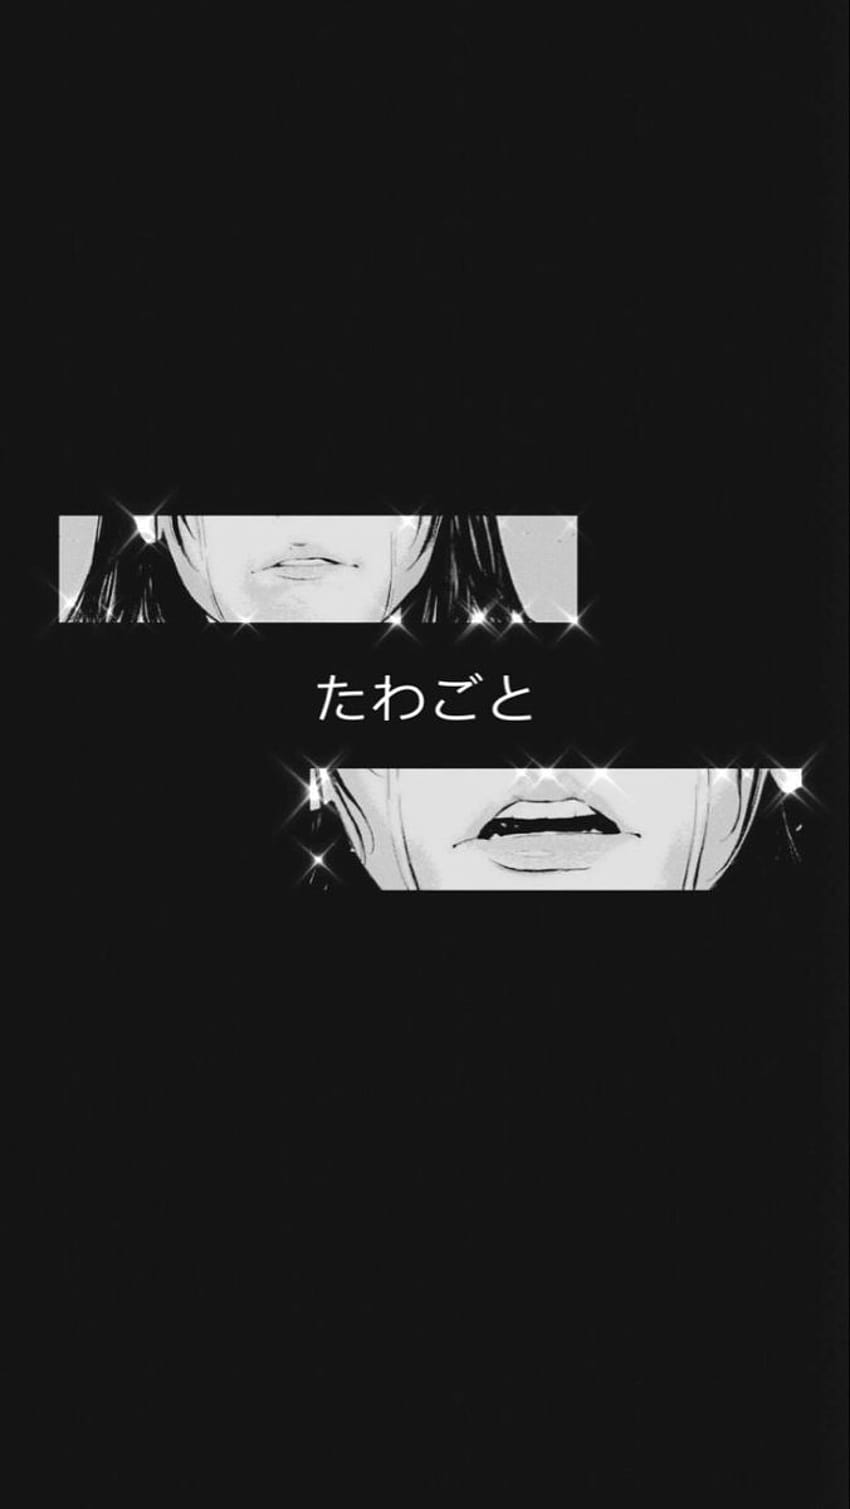 2 Black And White Anime Scenery, anime aesthetic black and white ...